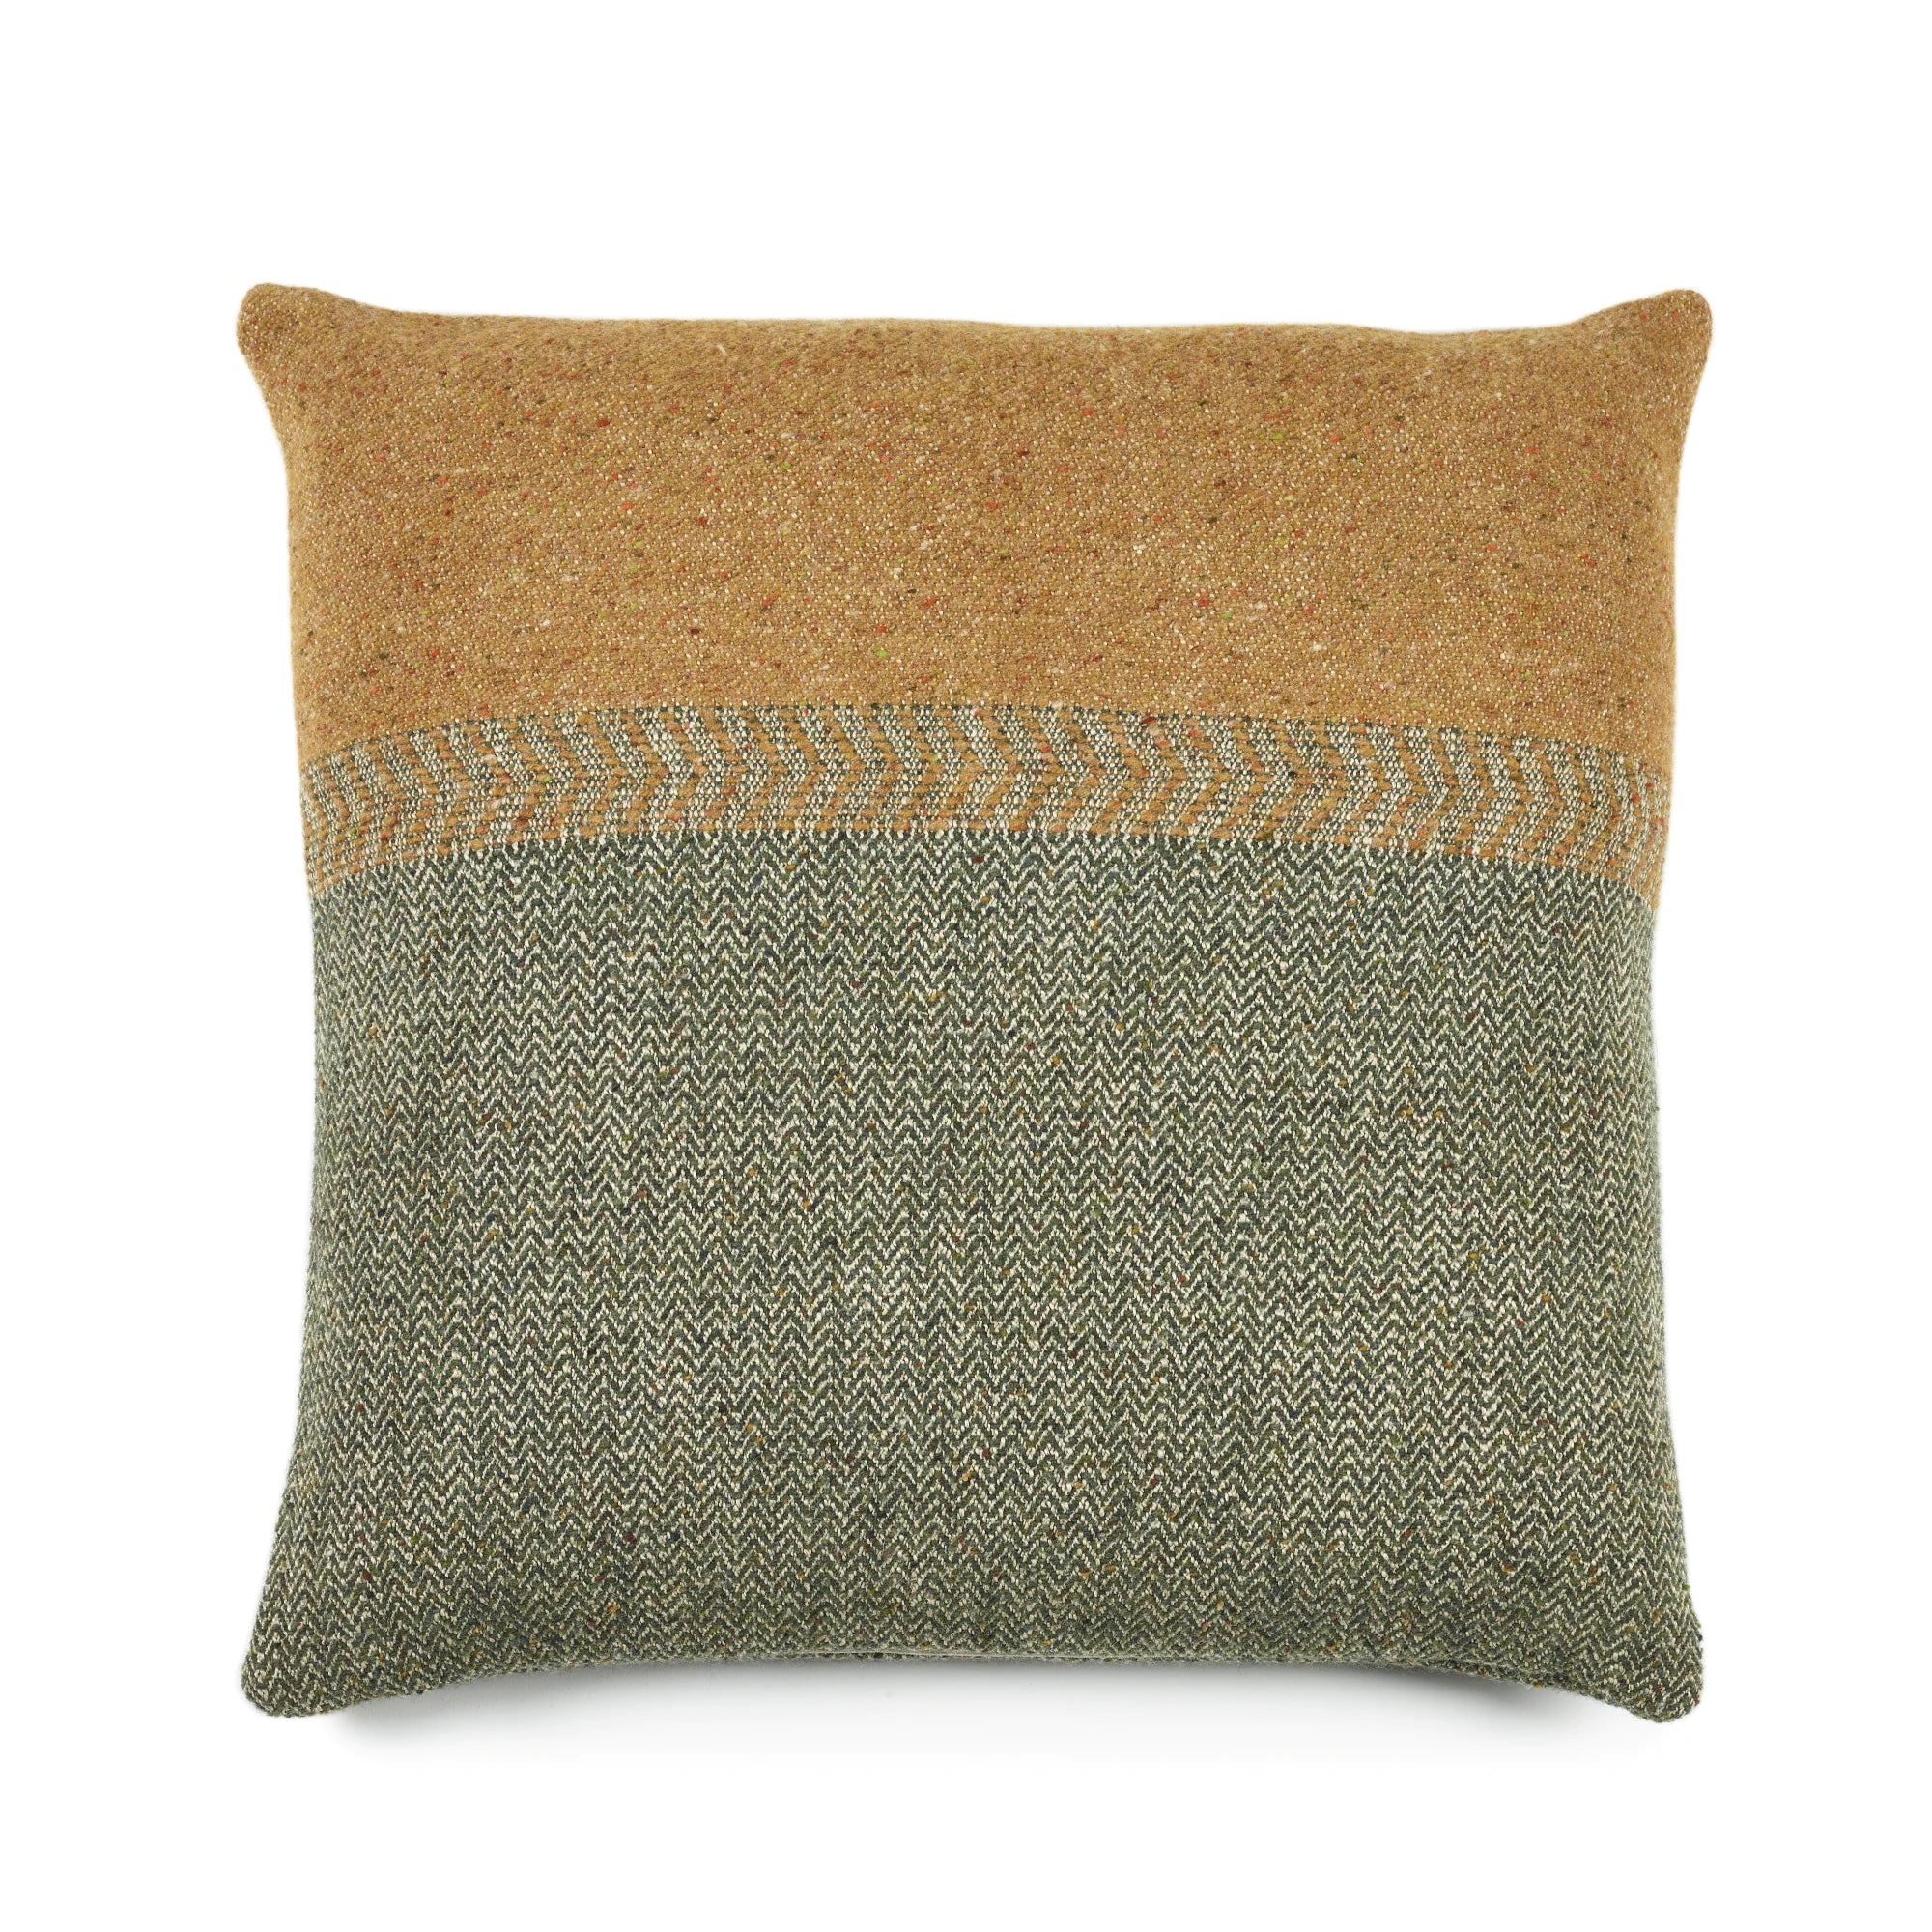 jules pillow cover by Libeco at adorn.house